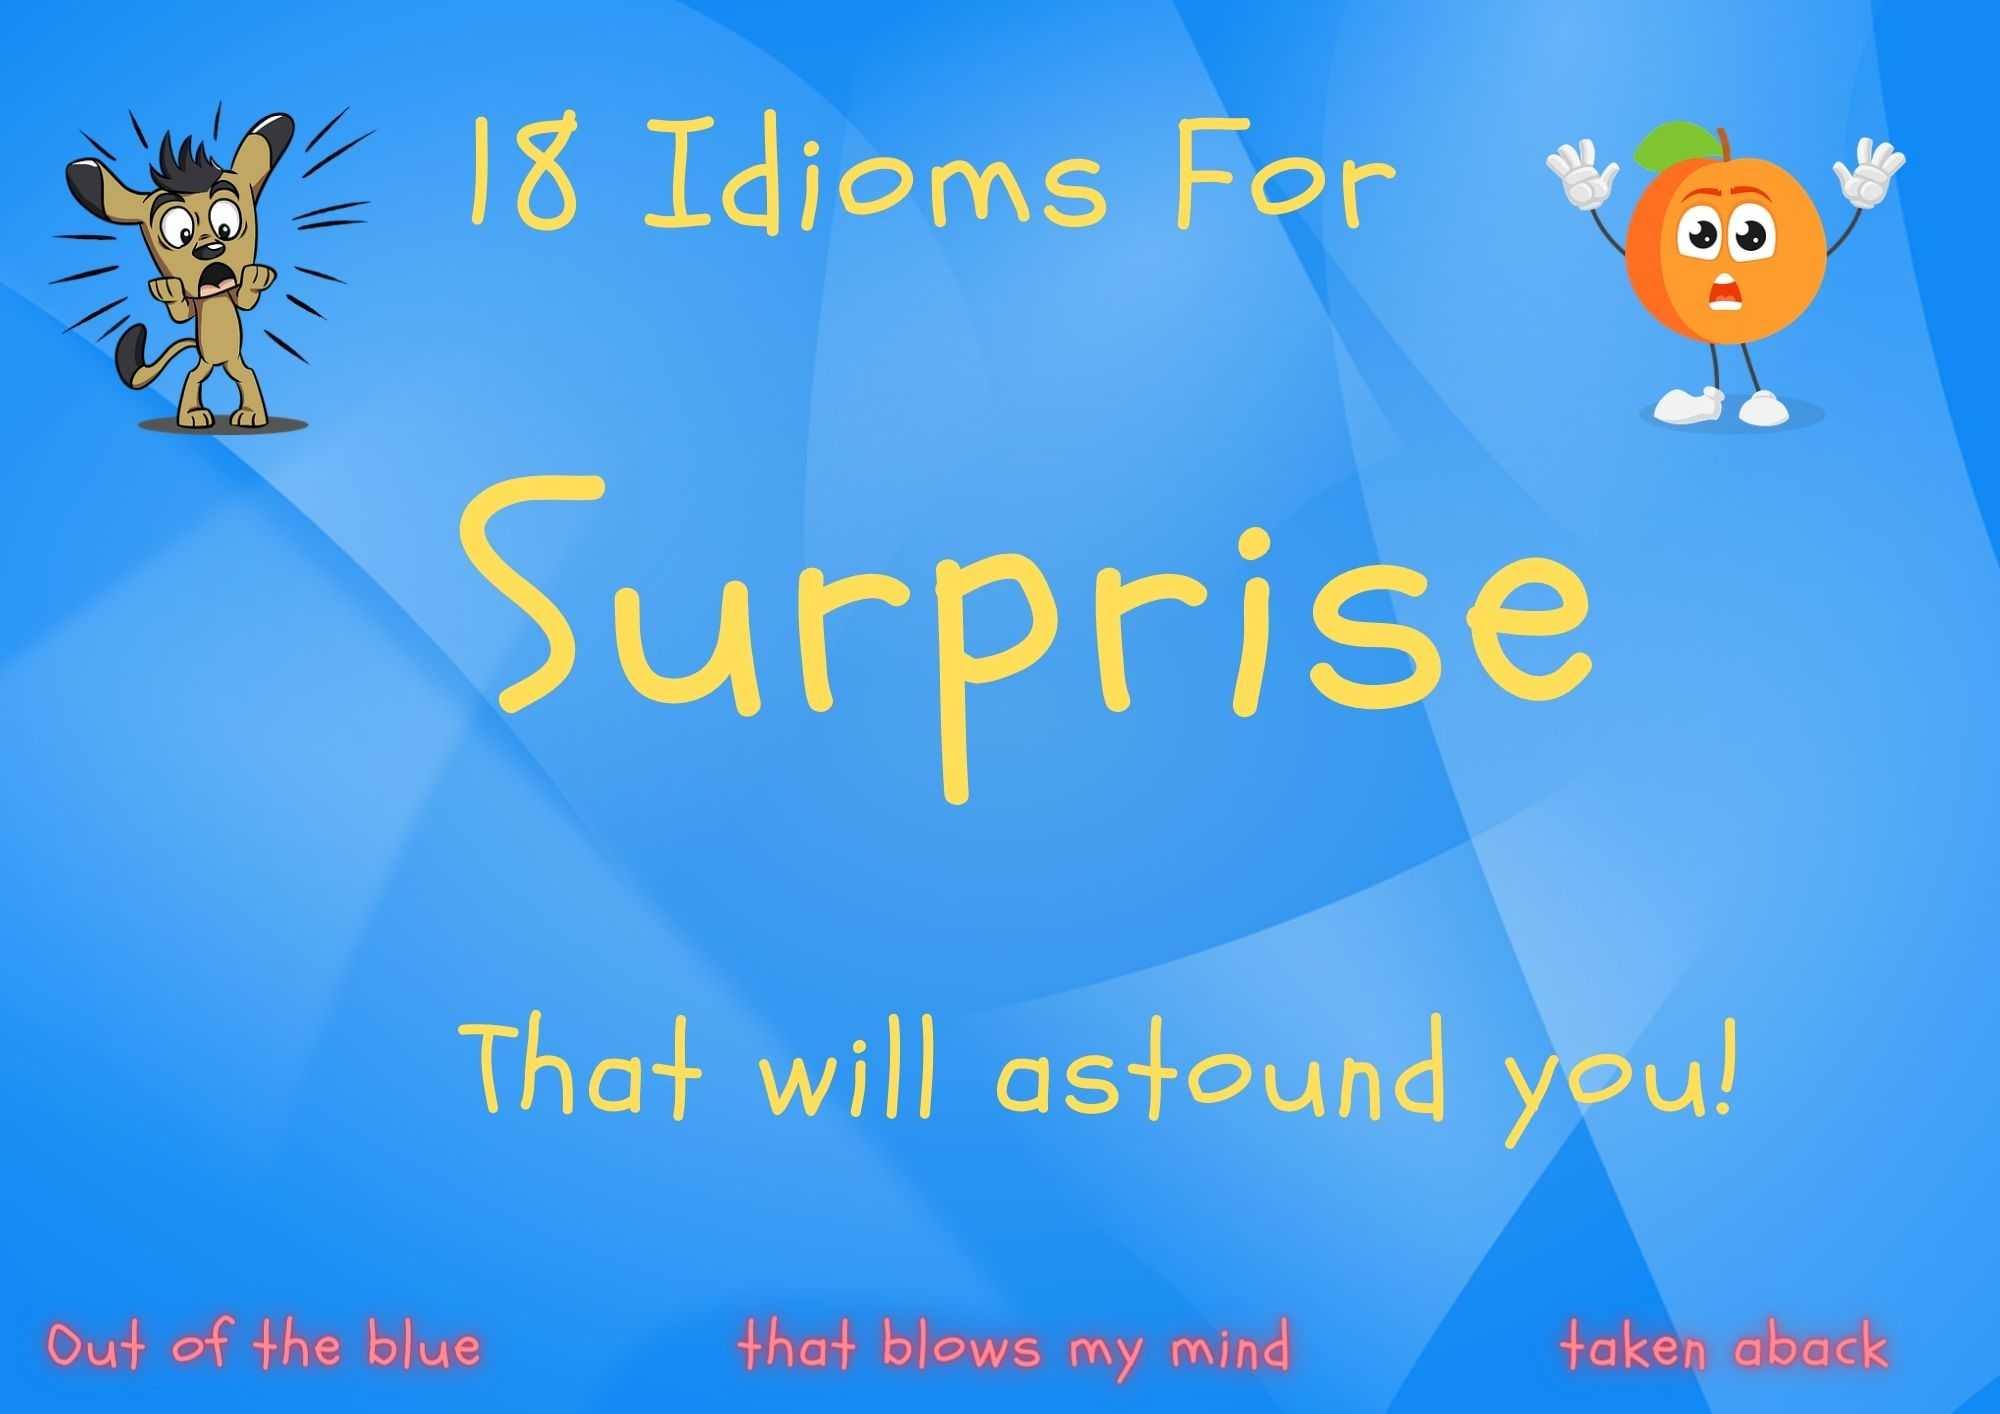 18 Idioms For Surprise: Be astounded!